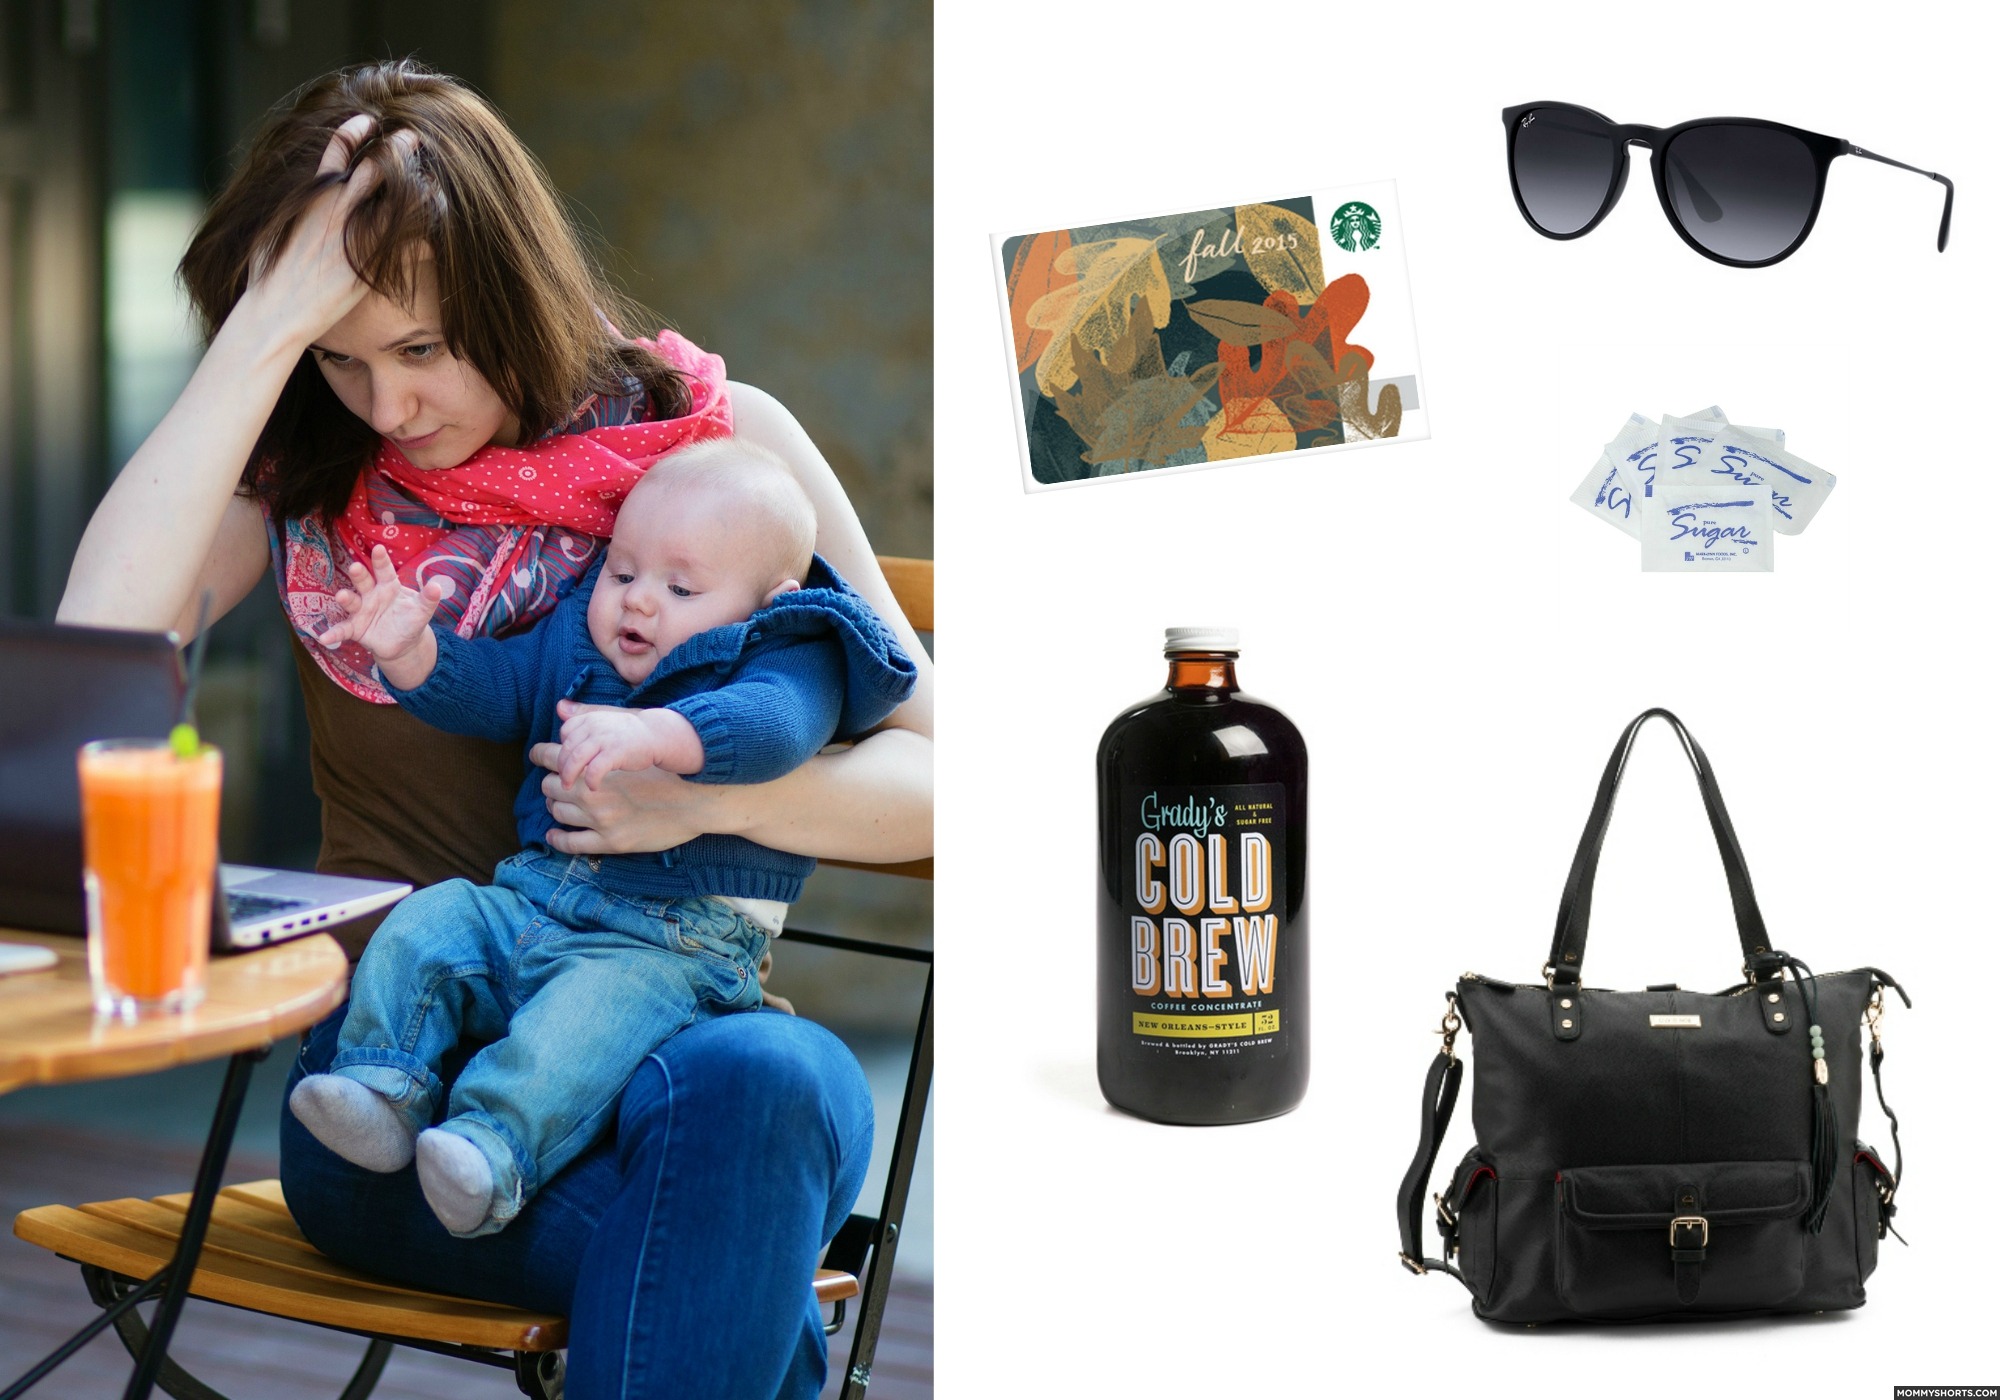 What do the contents of your diaper bag say about your parenting style?